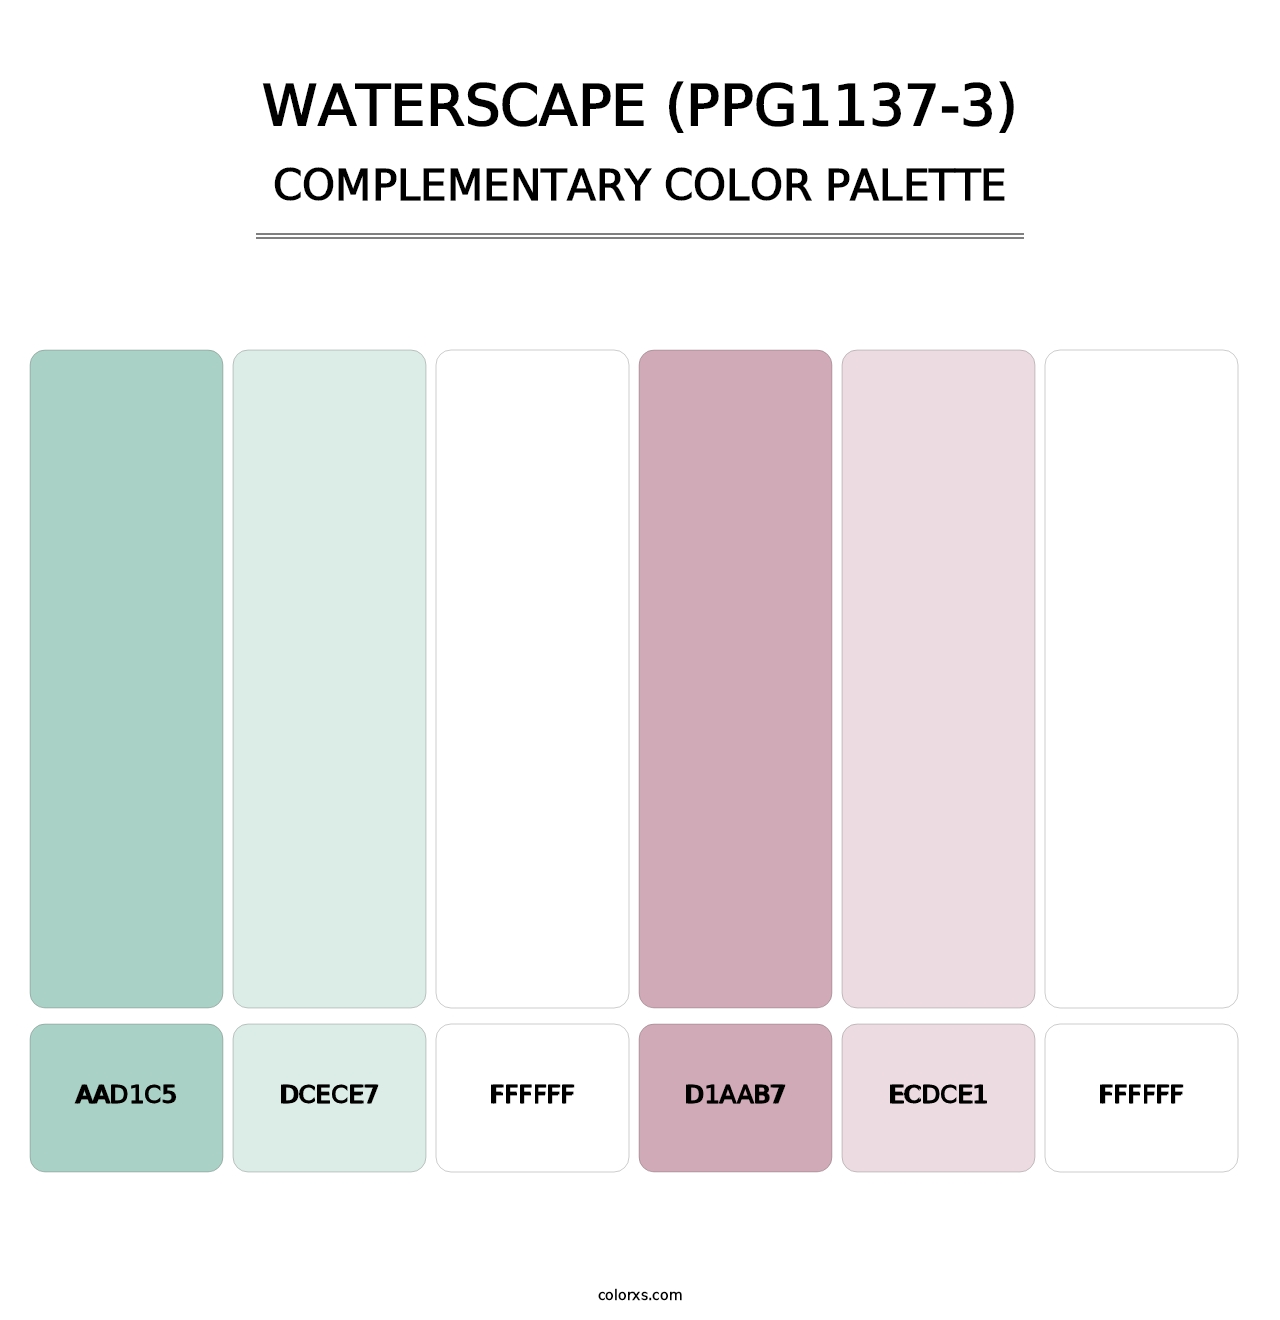 Waterscape (PPG1137-3) - Complementary Color Palette